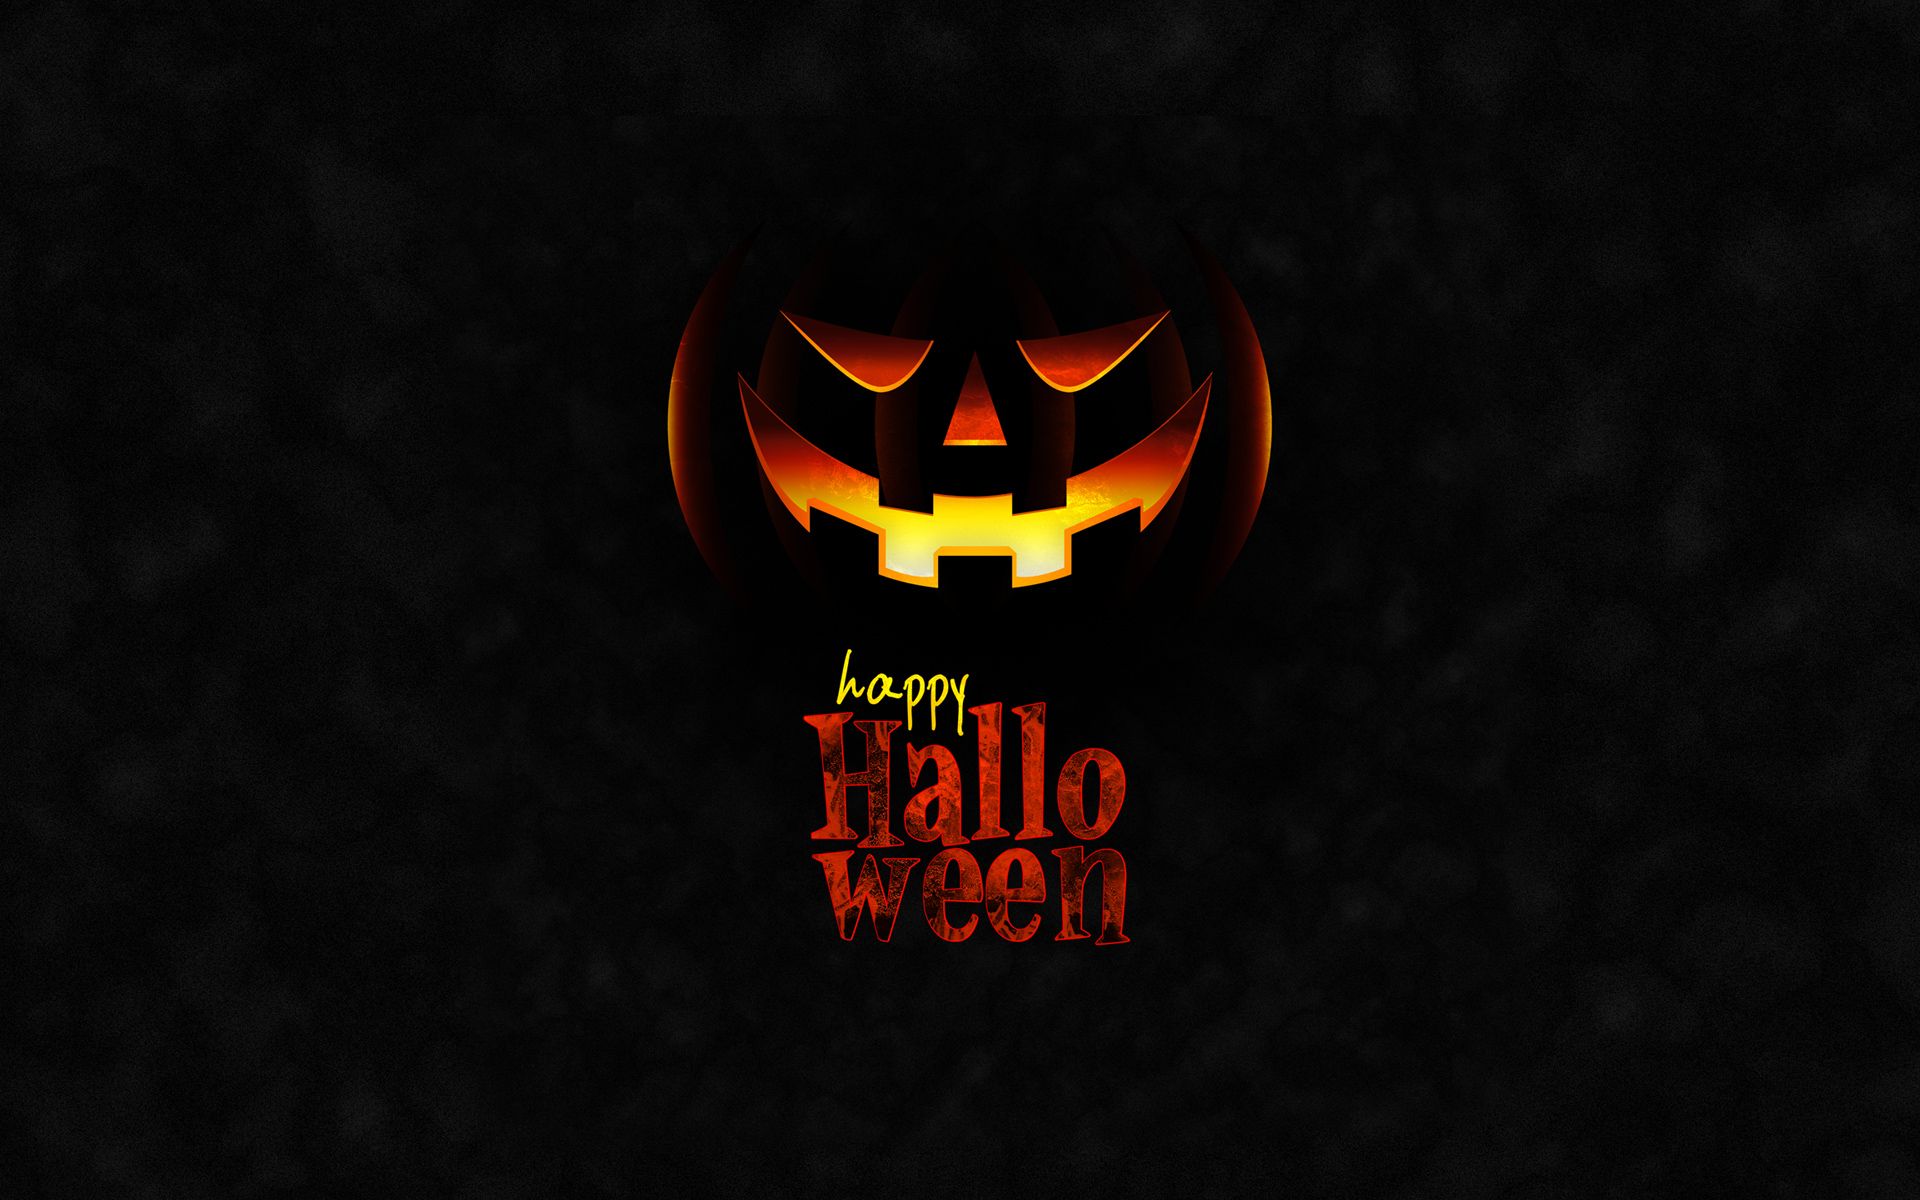 The halloween wallpaper is a great way to celebrate - Horror